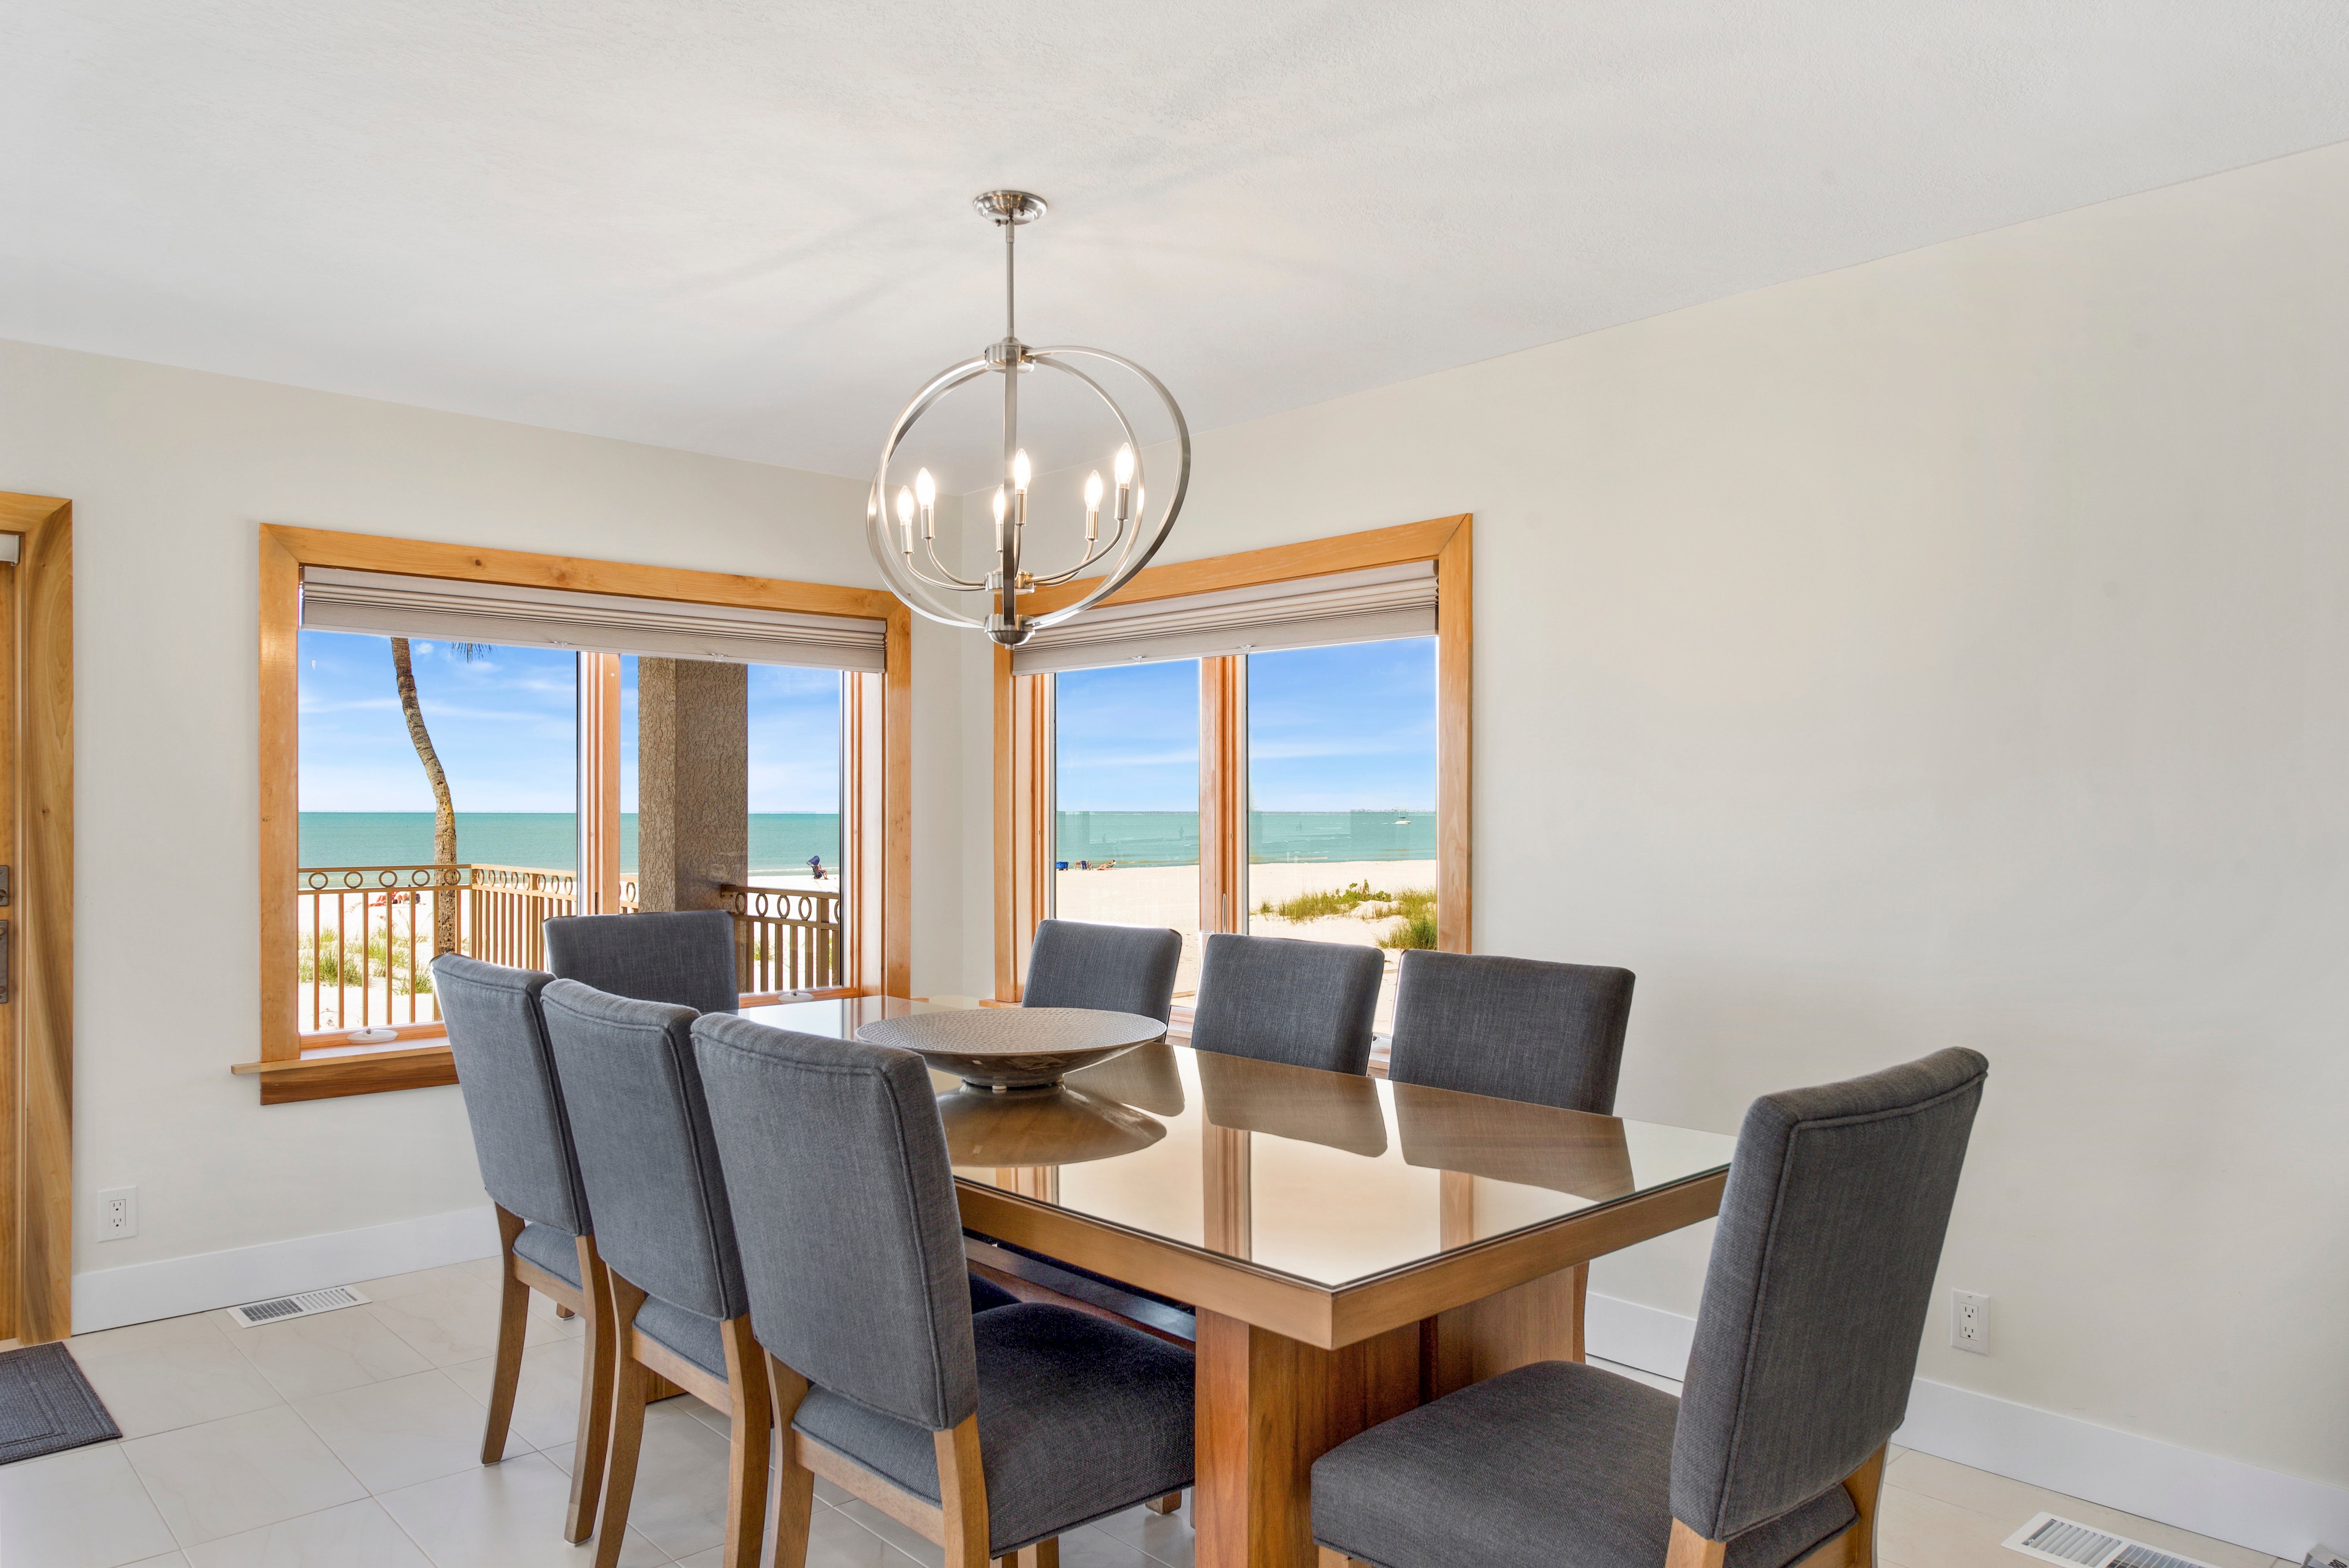 Dining area with view to Beach